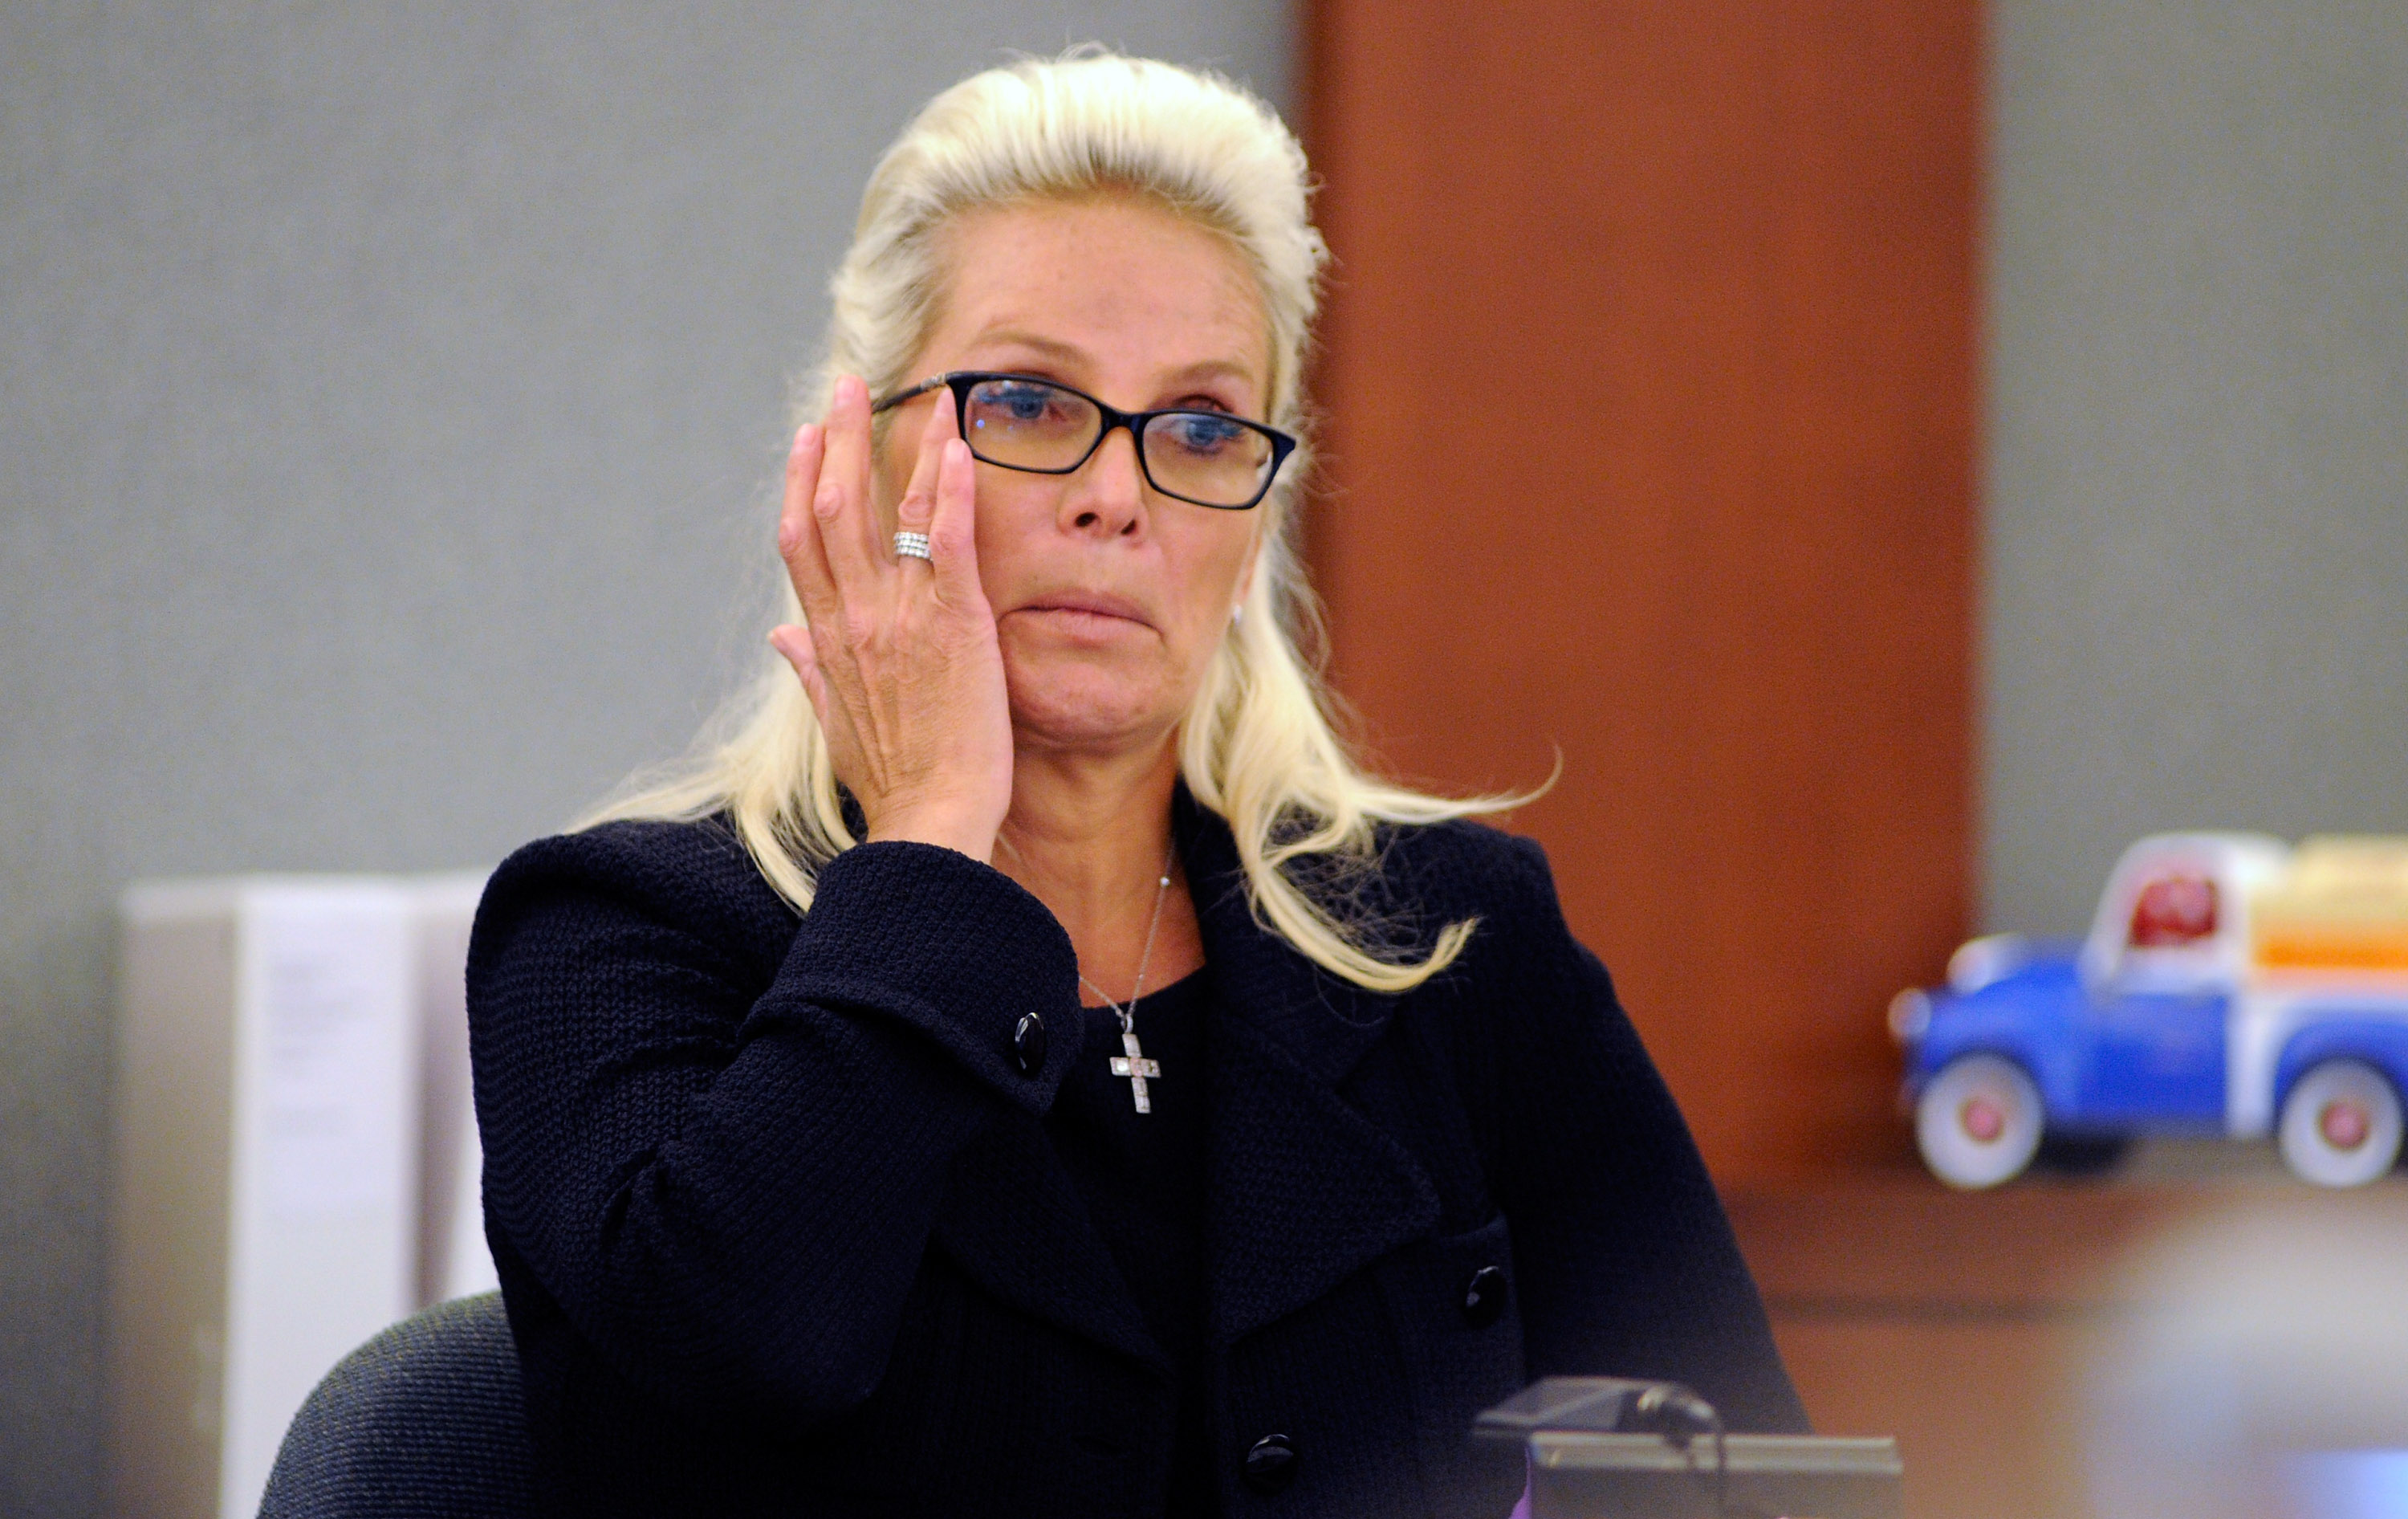 Kathleen McCrone Newton testifies on the witness stand during a court hearing at the Clark County Regional Justice Center on August 1, 2012 in Las Vegas, Nevada. | Source: Getty Images